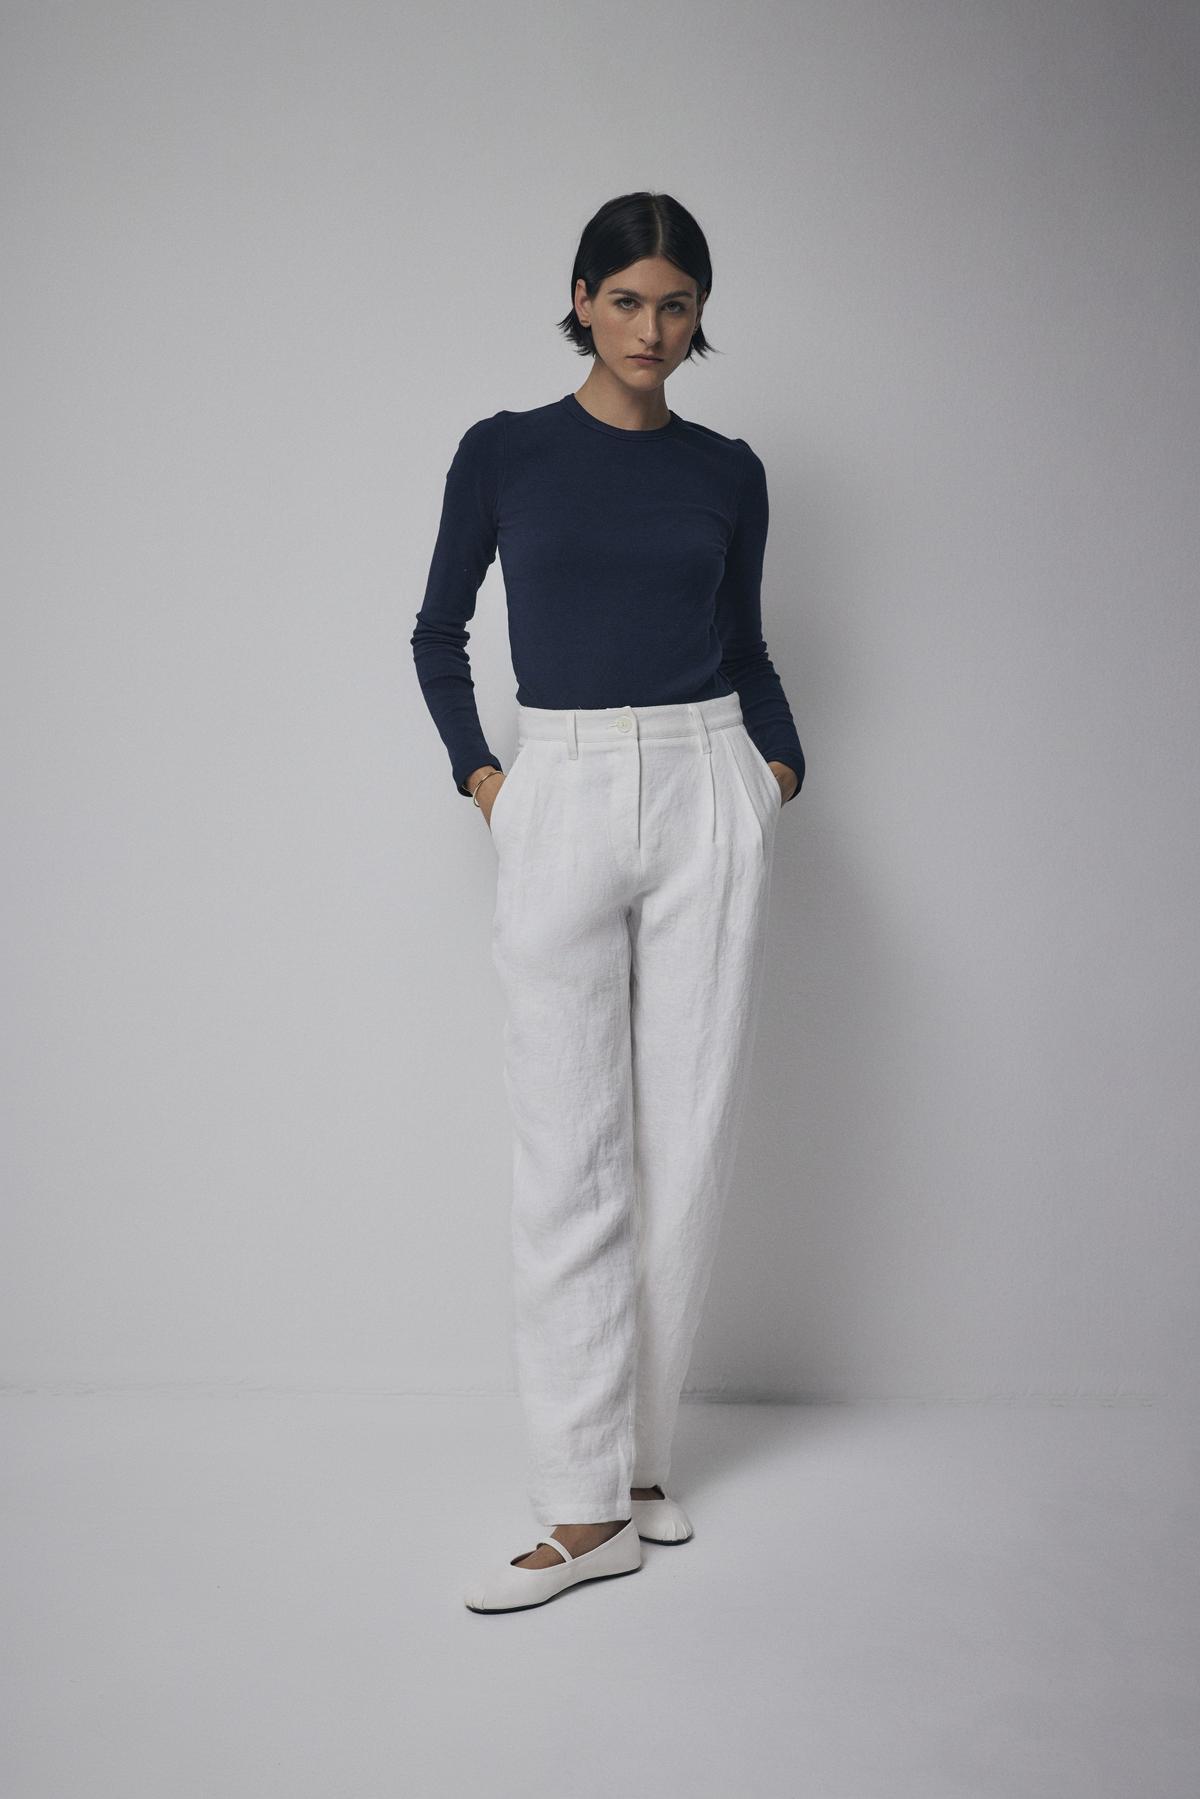 A person standing in a neutral pose wearing a Velvet by Jenny Graham CAMINO TEE, white trousers, and white flat shoes against a plain background.-36463422111937